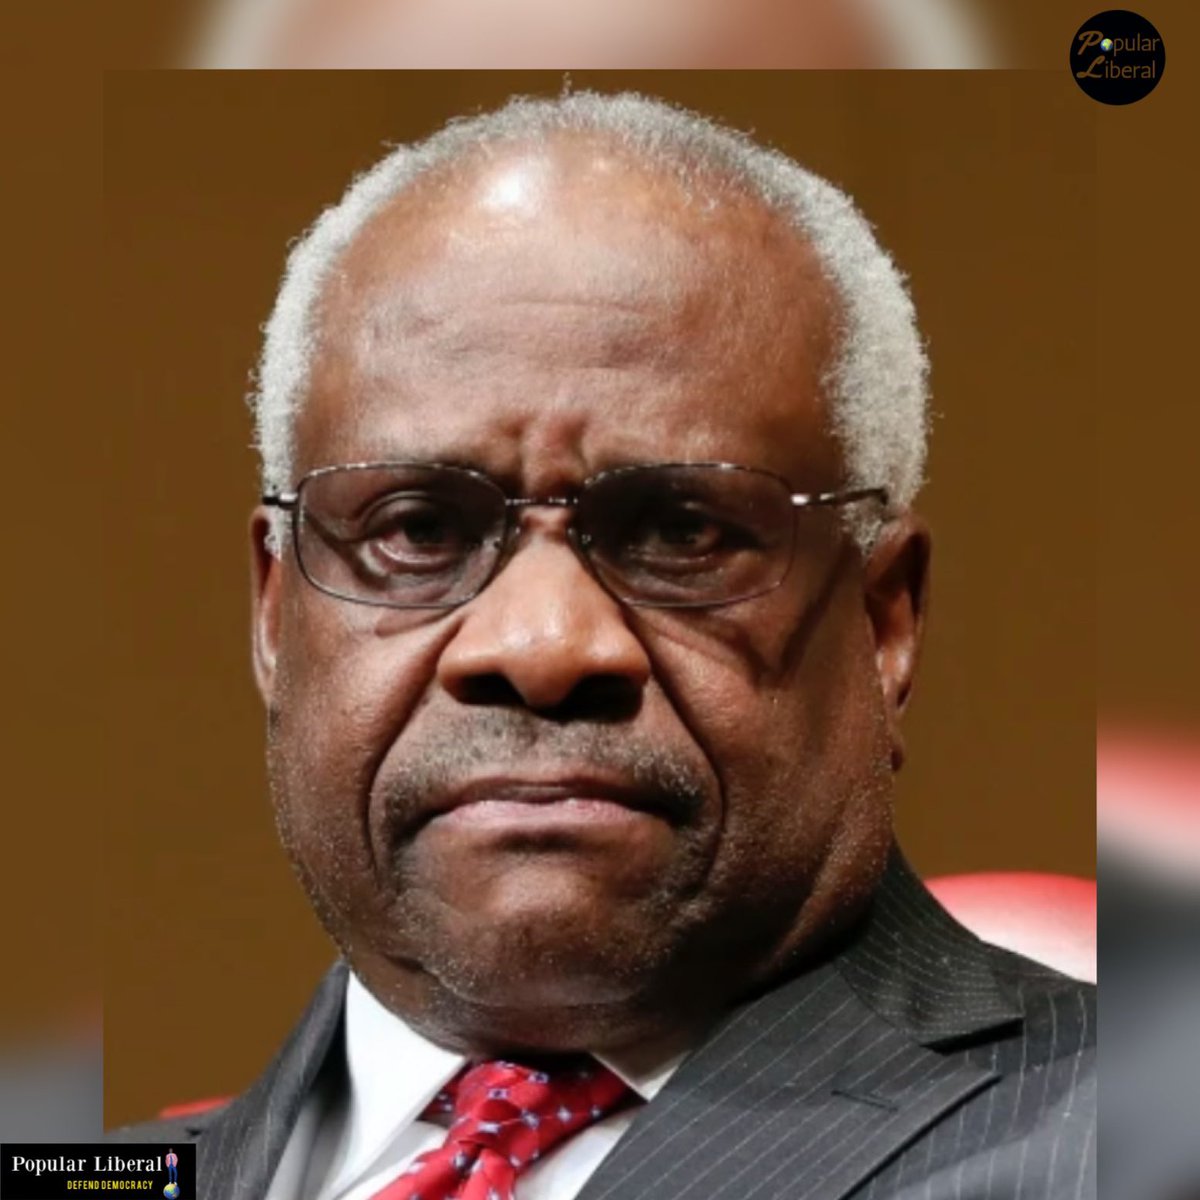 MAJOR BREAKING NEWS: A Senate investigation is focused on Harlan Crow's tax deductions for his superyacht, which was used by Clarence Thomas for vacations. 

Documents obtained by CNBC show that the yacht was registered as a pleasure vessel, not a commercial one, while Crow…